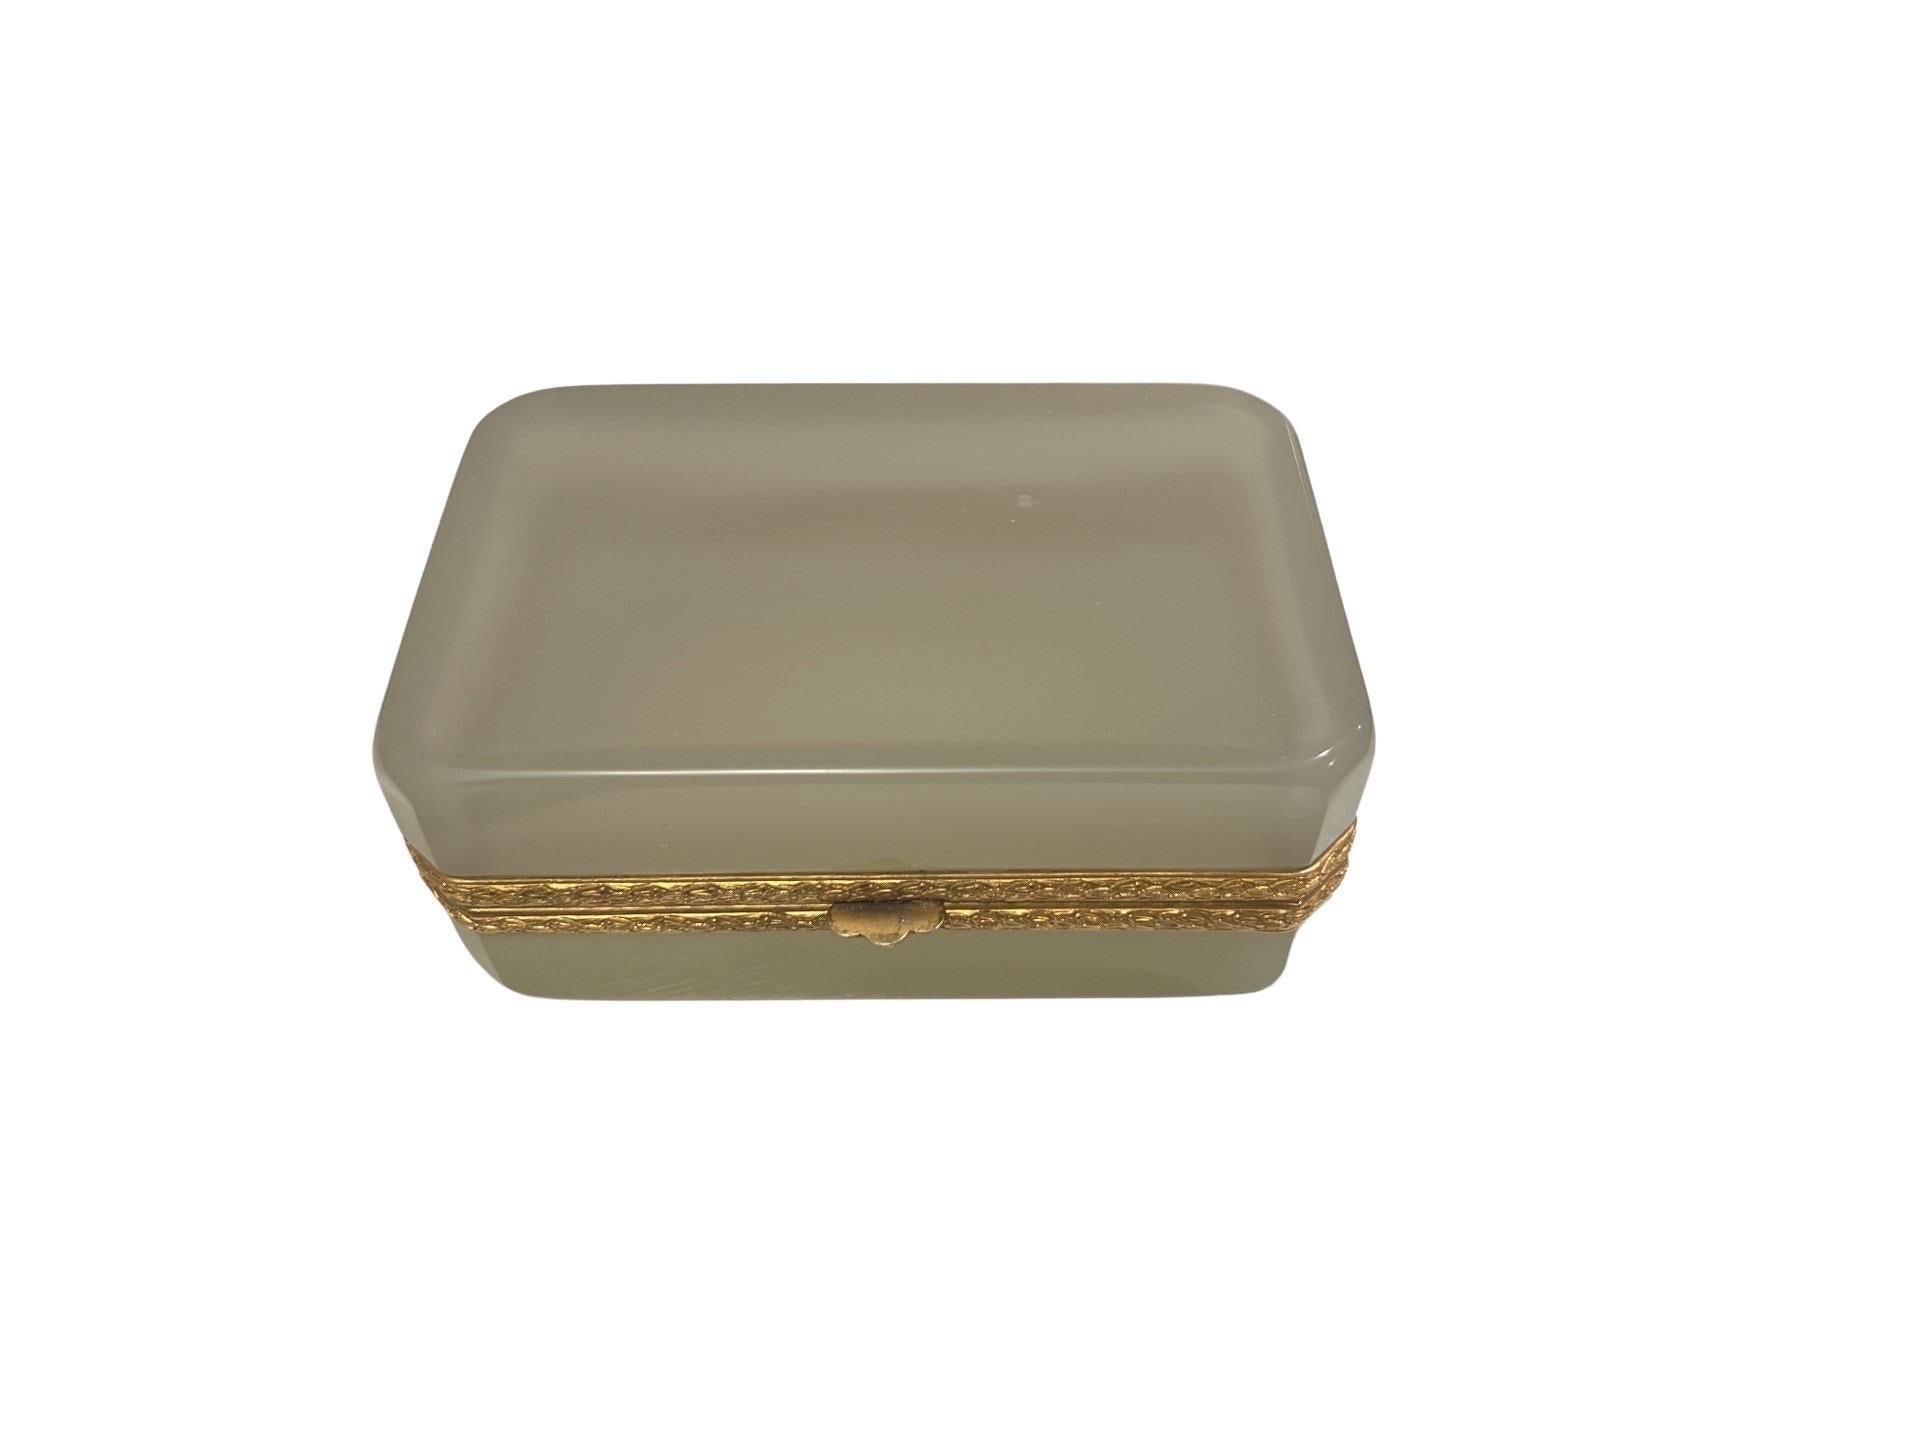 French, early 20th century.
An antique French opaline glass casket having a doré bronze hinge and banding.